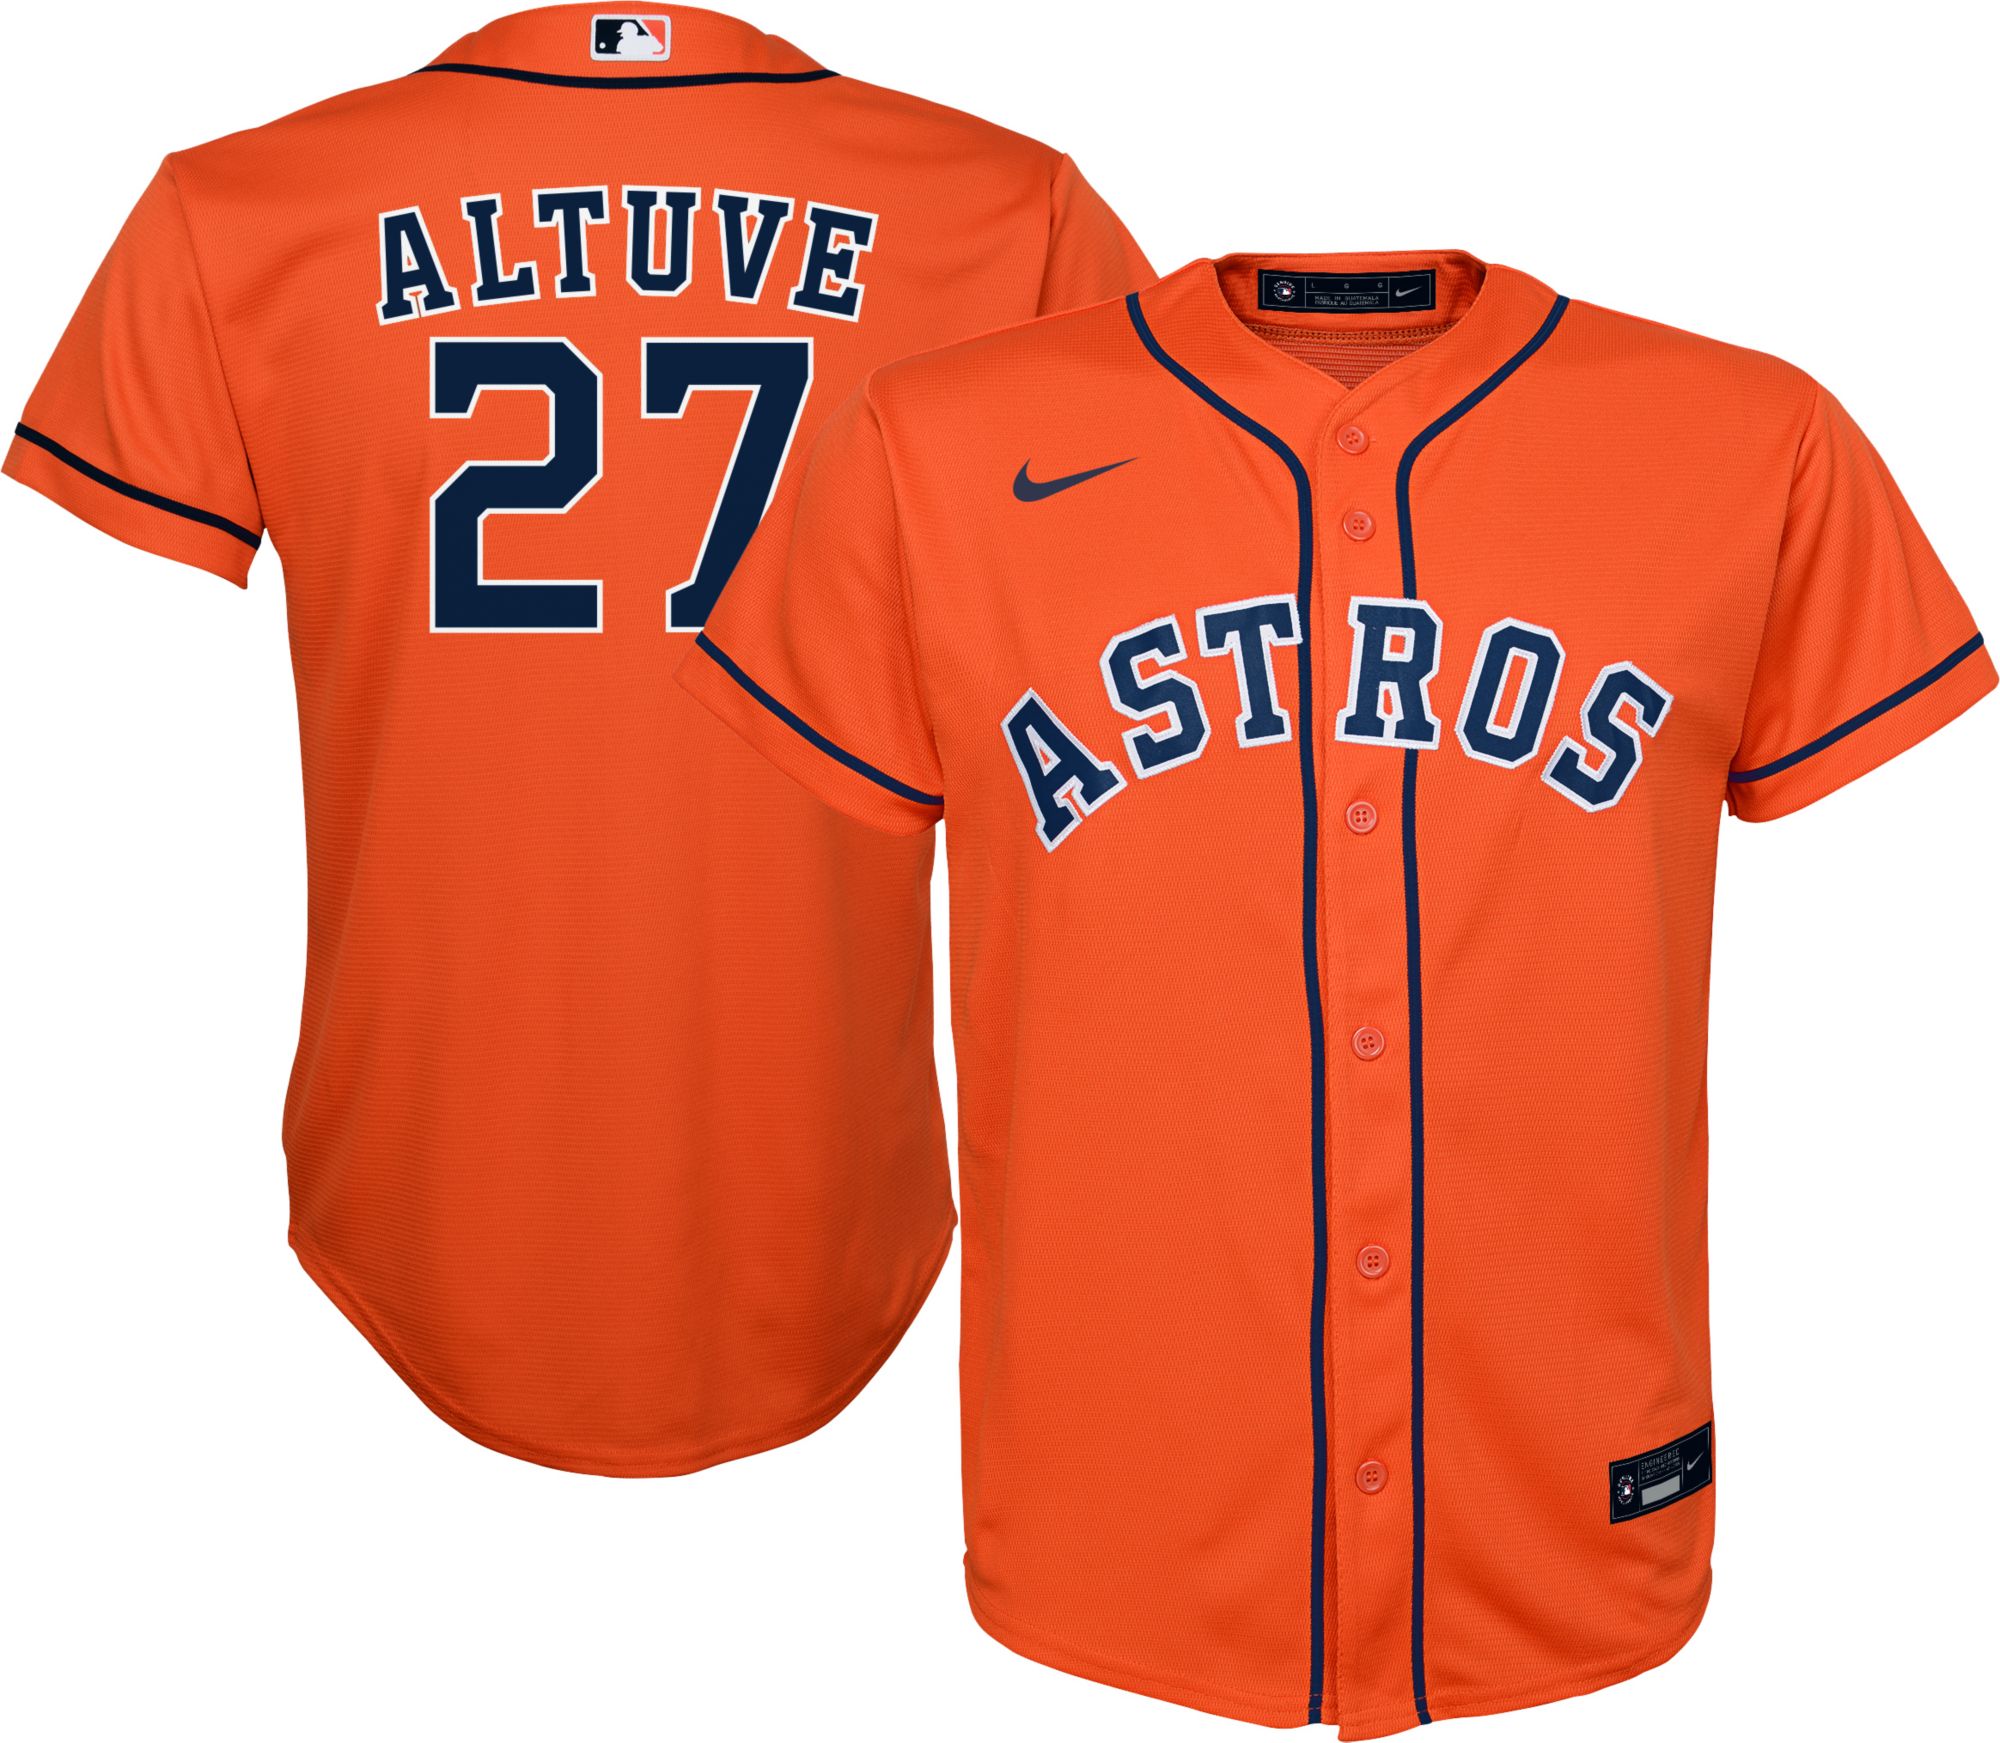 Houston Astros Majestic Road Flex Base Authentic Collection Custom Jersey Gray